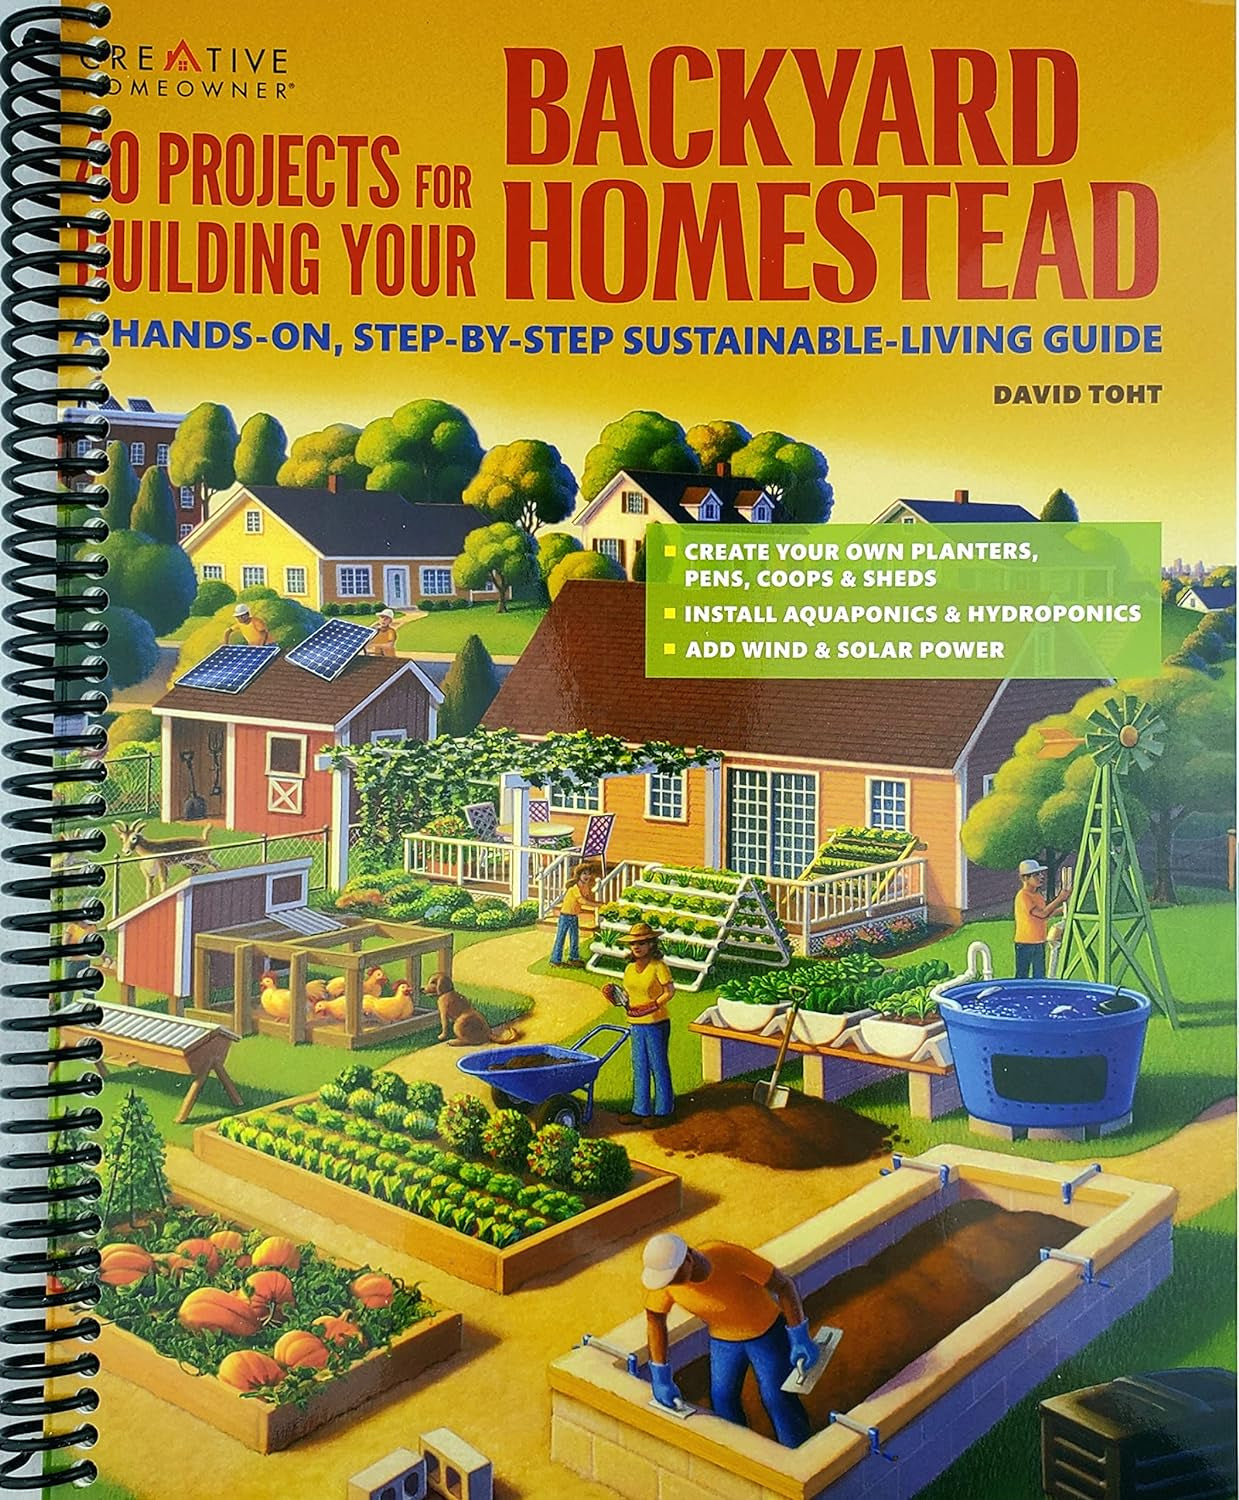 40 Projects for Building Your Backyard Homestead: a Hands-On, Step-By-Step Sustainable-Living Guide (Creative Homeowner) Fences, Chicken Coops, Sheds, Gardening, and More for Becoming Self-Sufficient